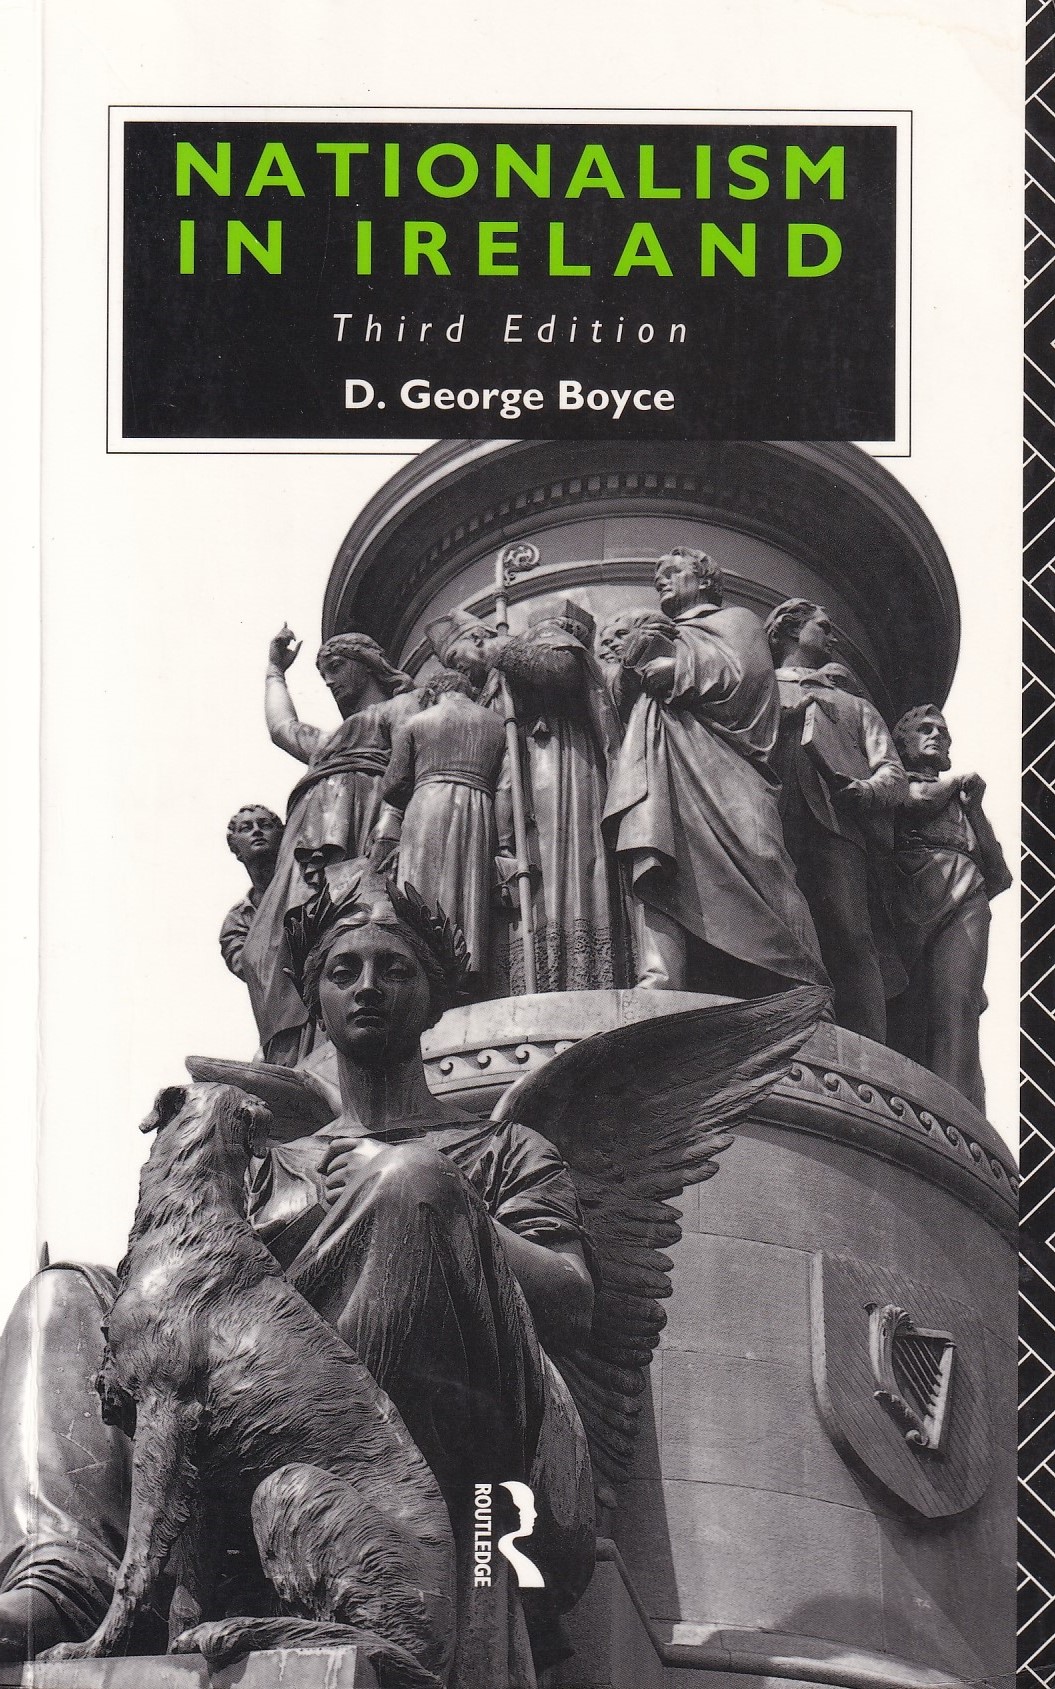 Nationalism in Ireland, Third Edition by D. George Boyce